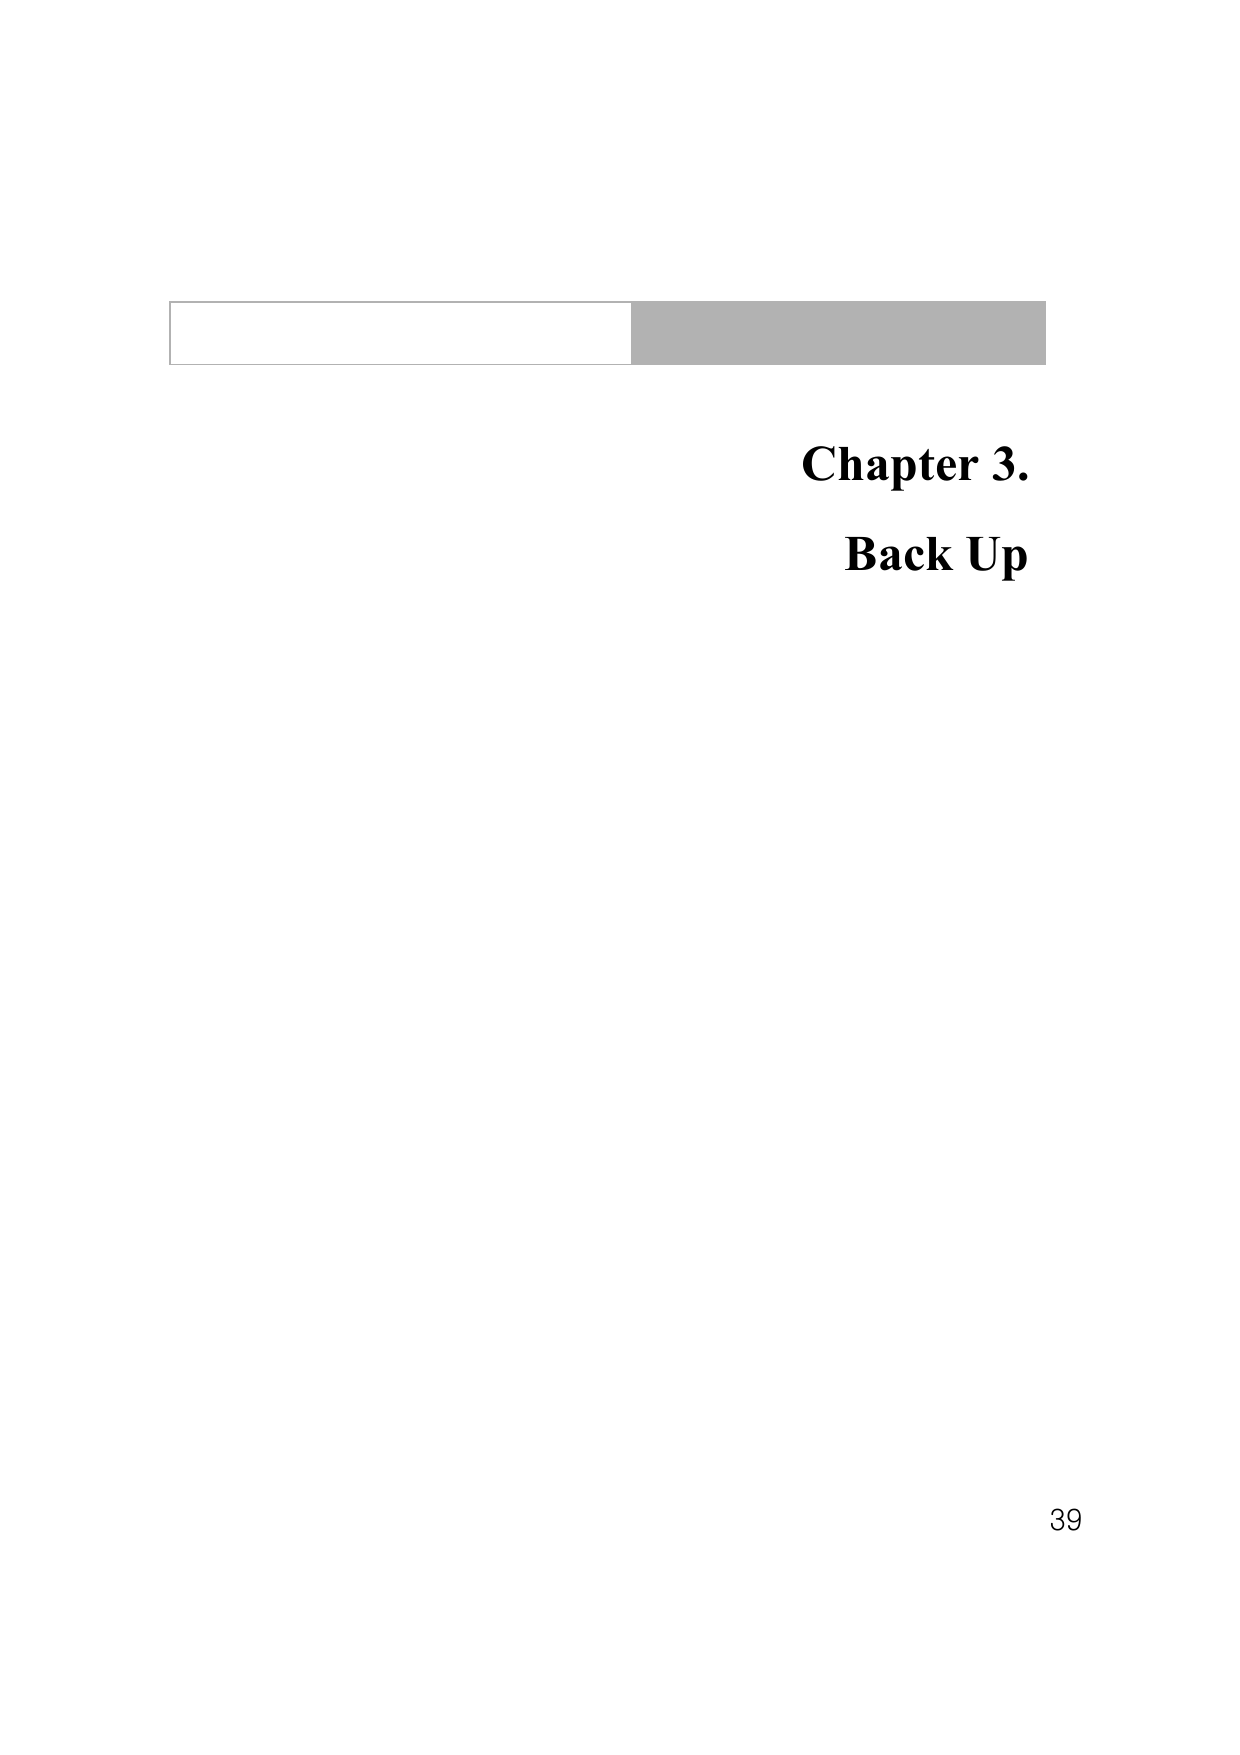 39Chapter 3.Back Up